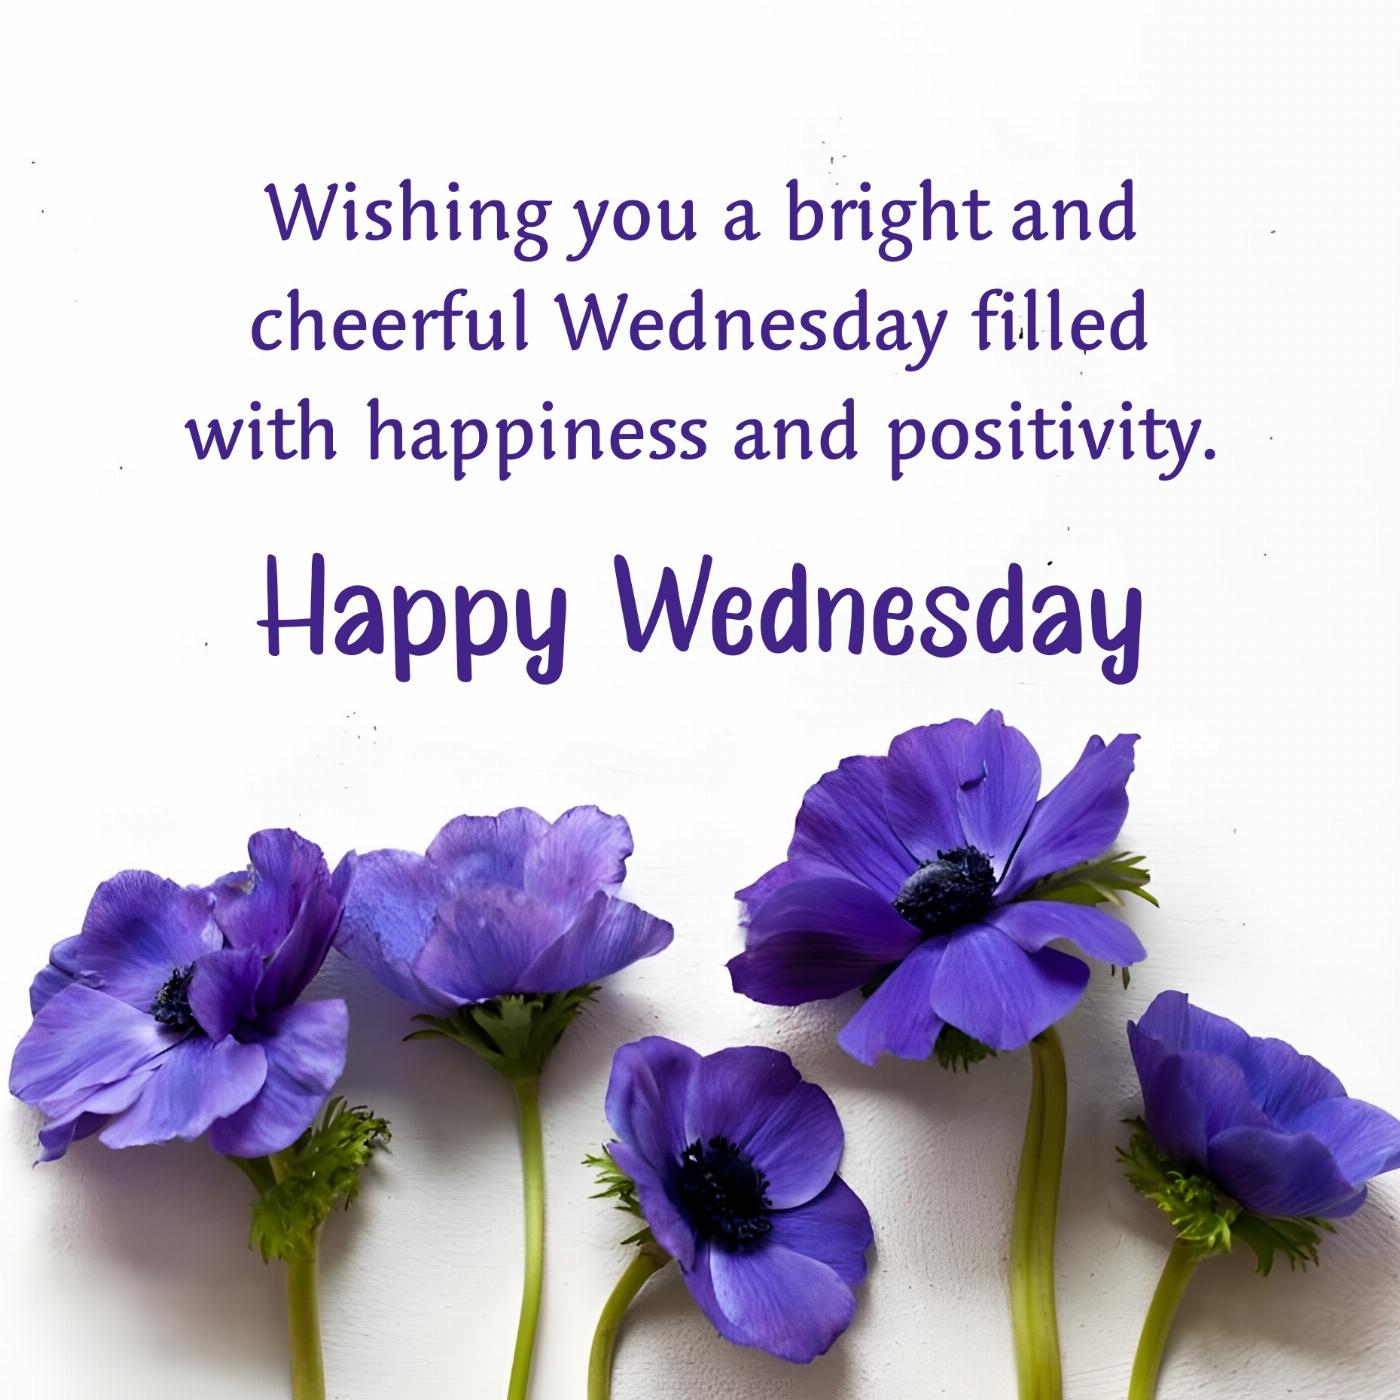 Wishing you a bright and cheerful Wednesday